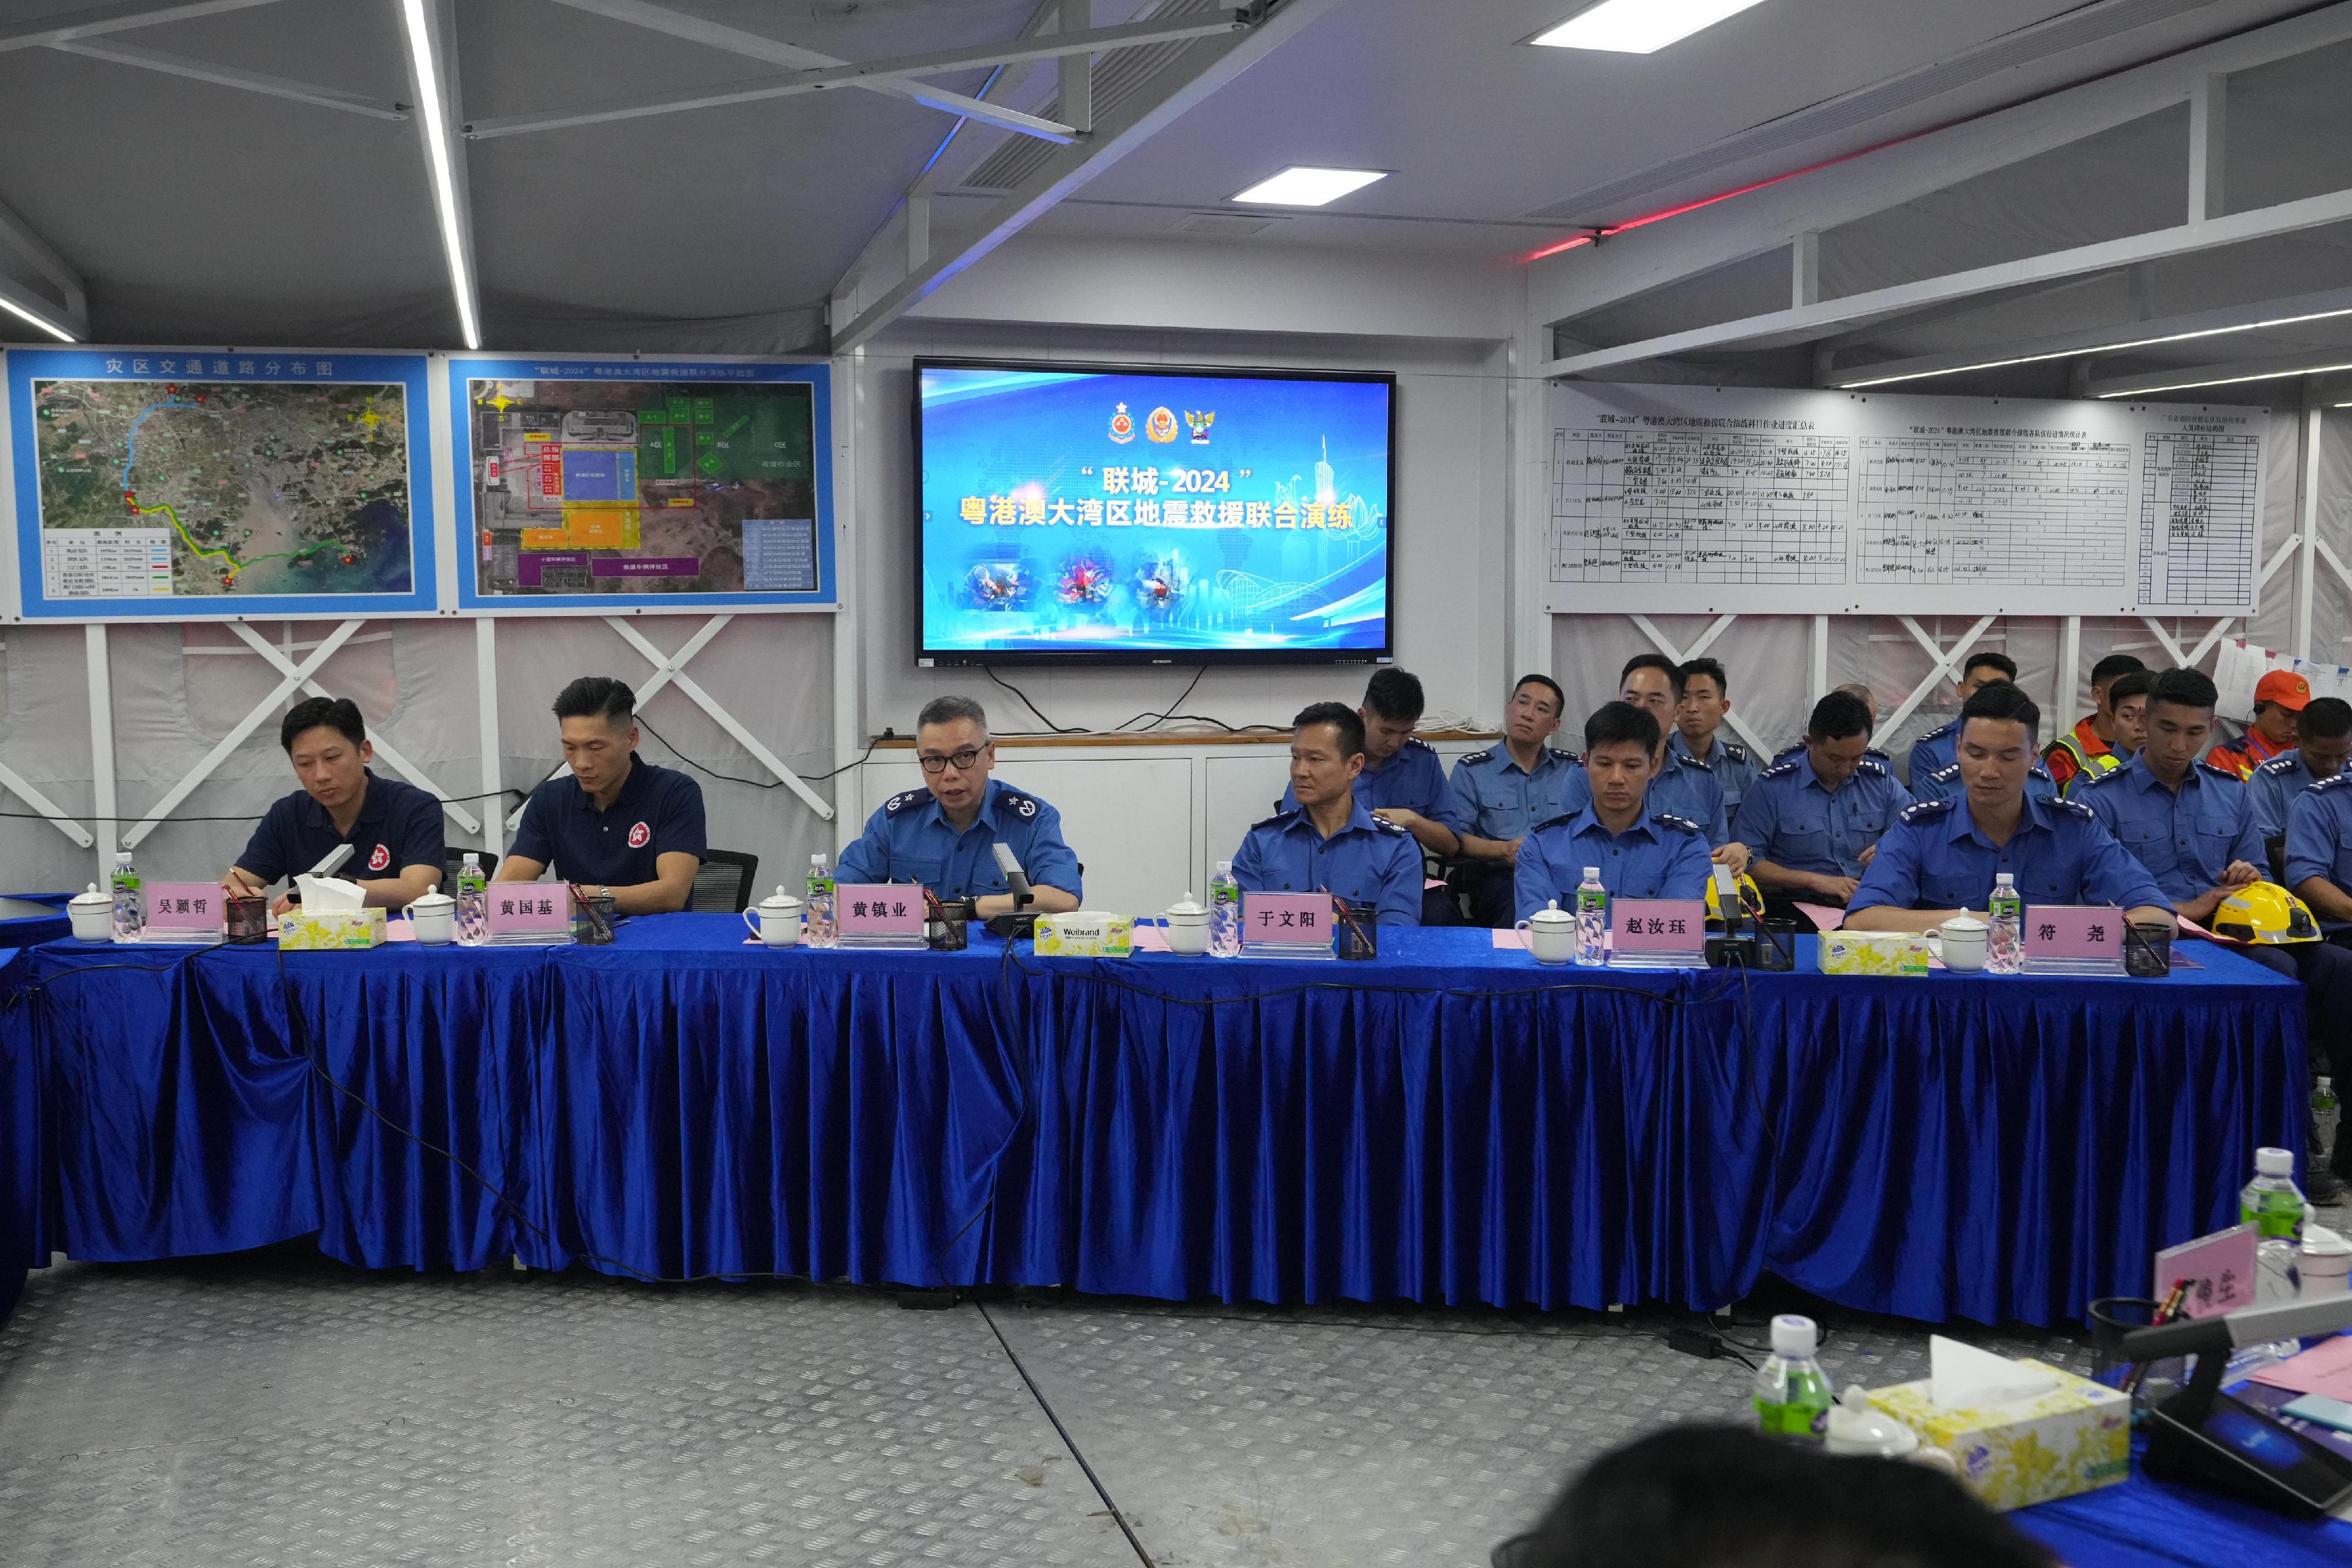 The Fire and Rescue Corps of Guangdong Province, the Hong Kong Fire Services Department and the Macao Fire Services Bureau have conducted the Guangdong-Hong Kong-Macao Greater Bay Area joint emergency response and rescue exercise "Liancheng-2024" in Jiangmen, Guangdong Province from May 27 to today (May 29). Photo shows the Deputy Director of Fire Services (Operations), Mr Angus Wong (third left), speaking at a command meeting.